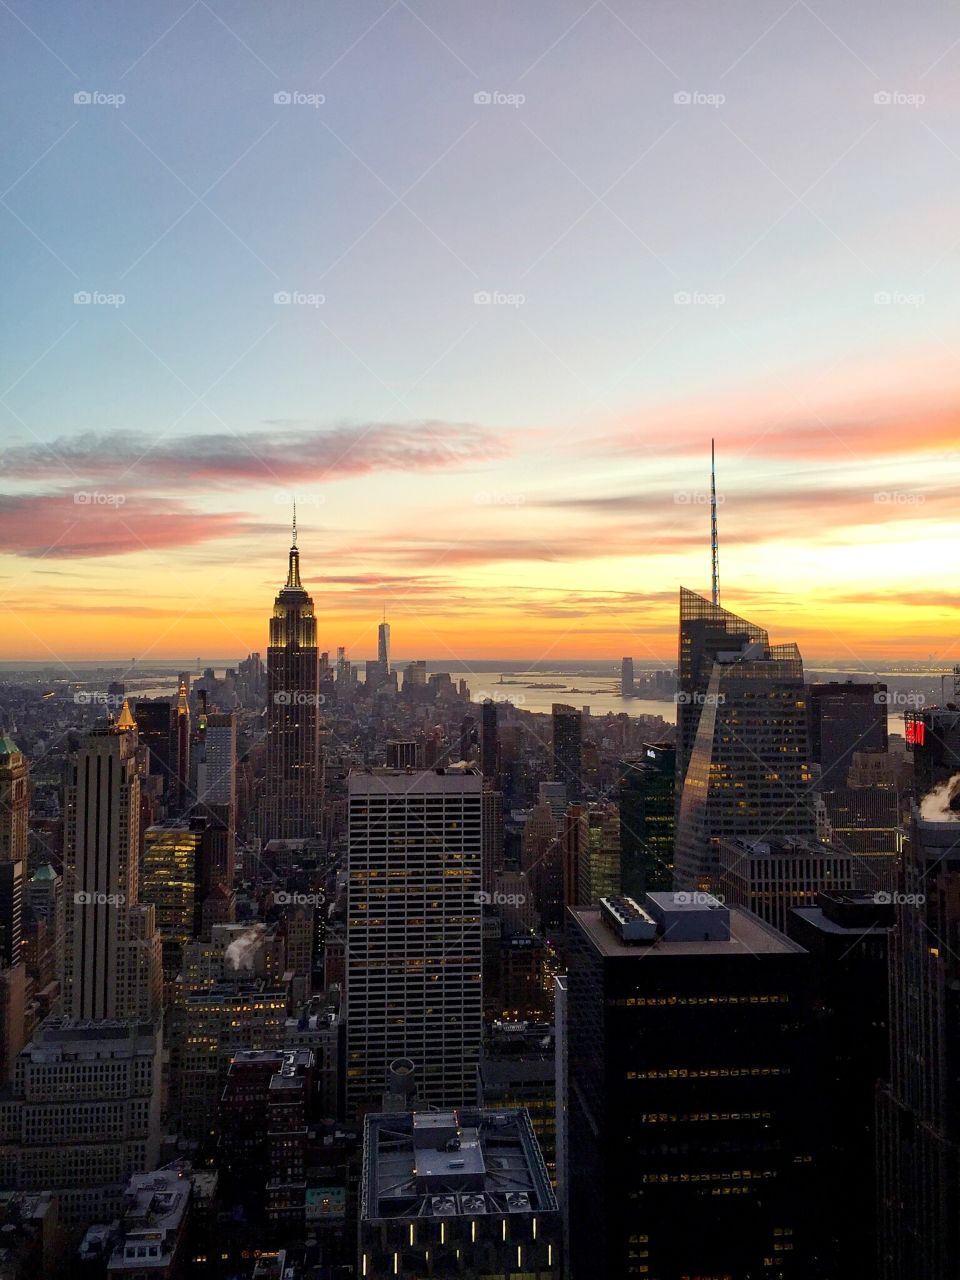 Sunset over empire state building, new york city